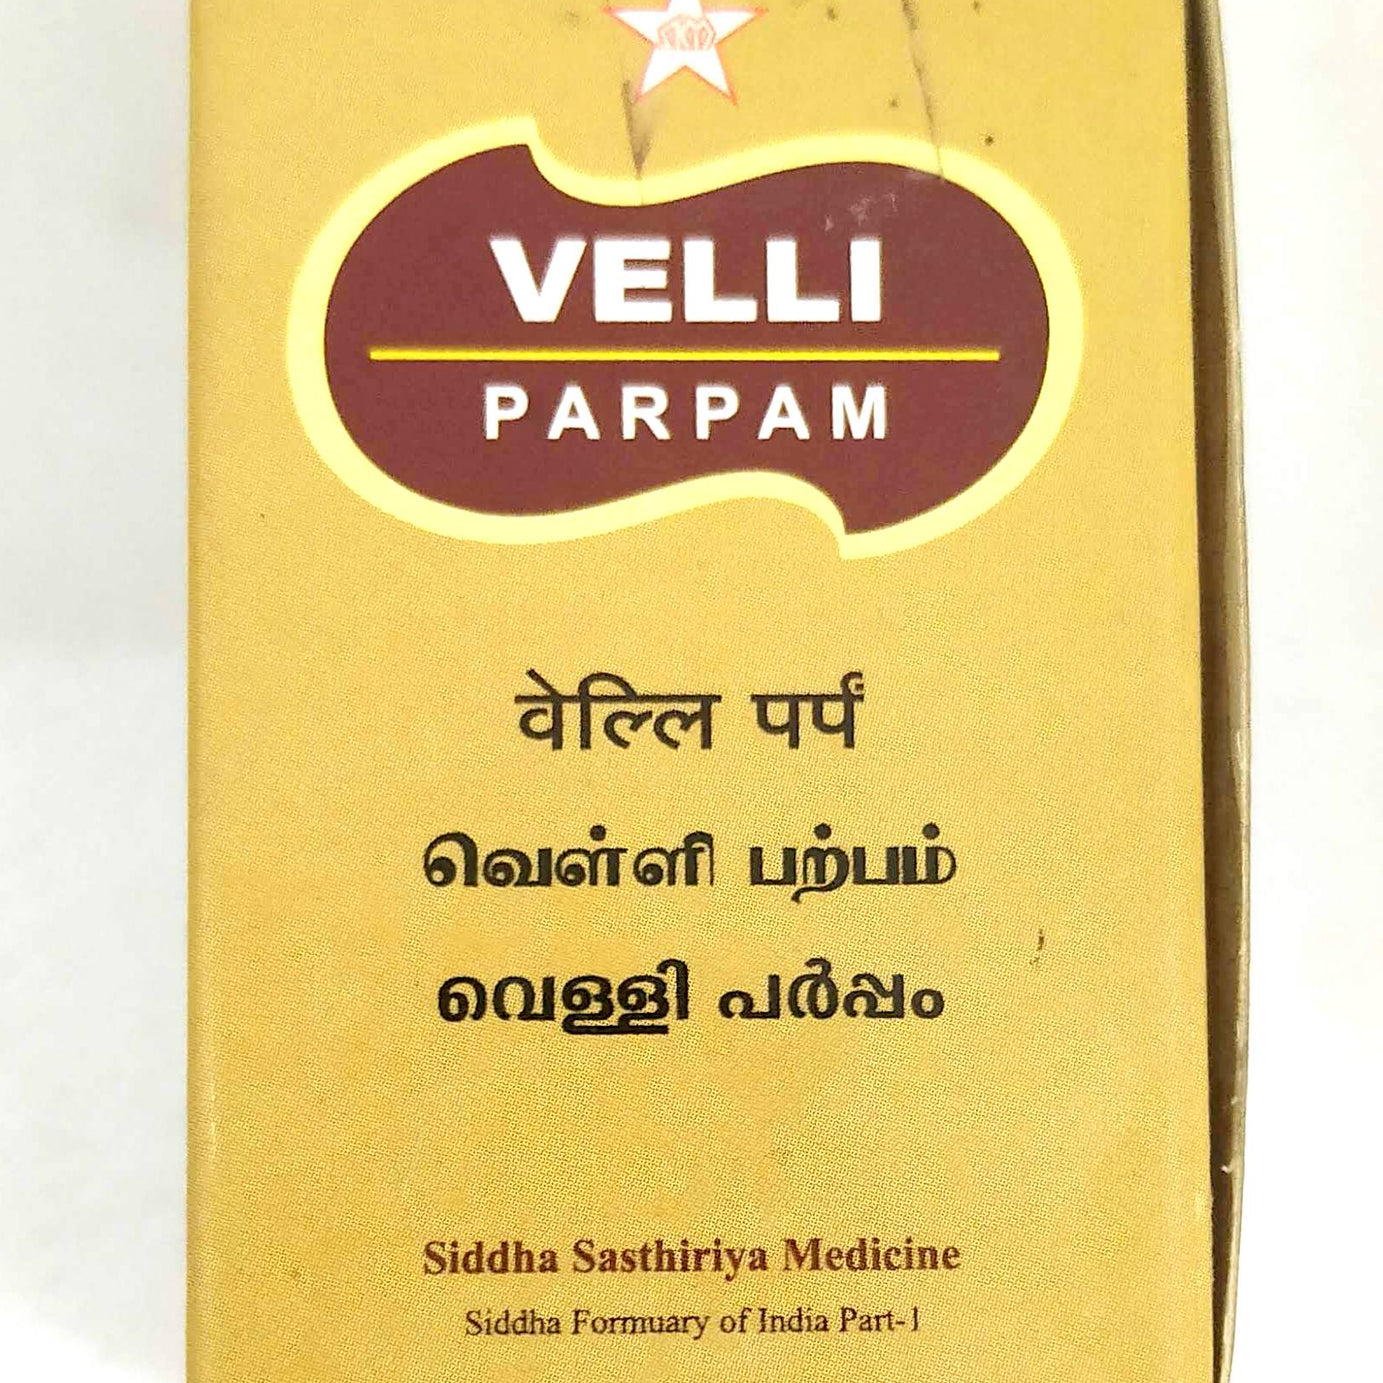 Shop SKM Velli Parpam 2gm at price 1020.00 from SKM Online - Ayush Care